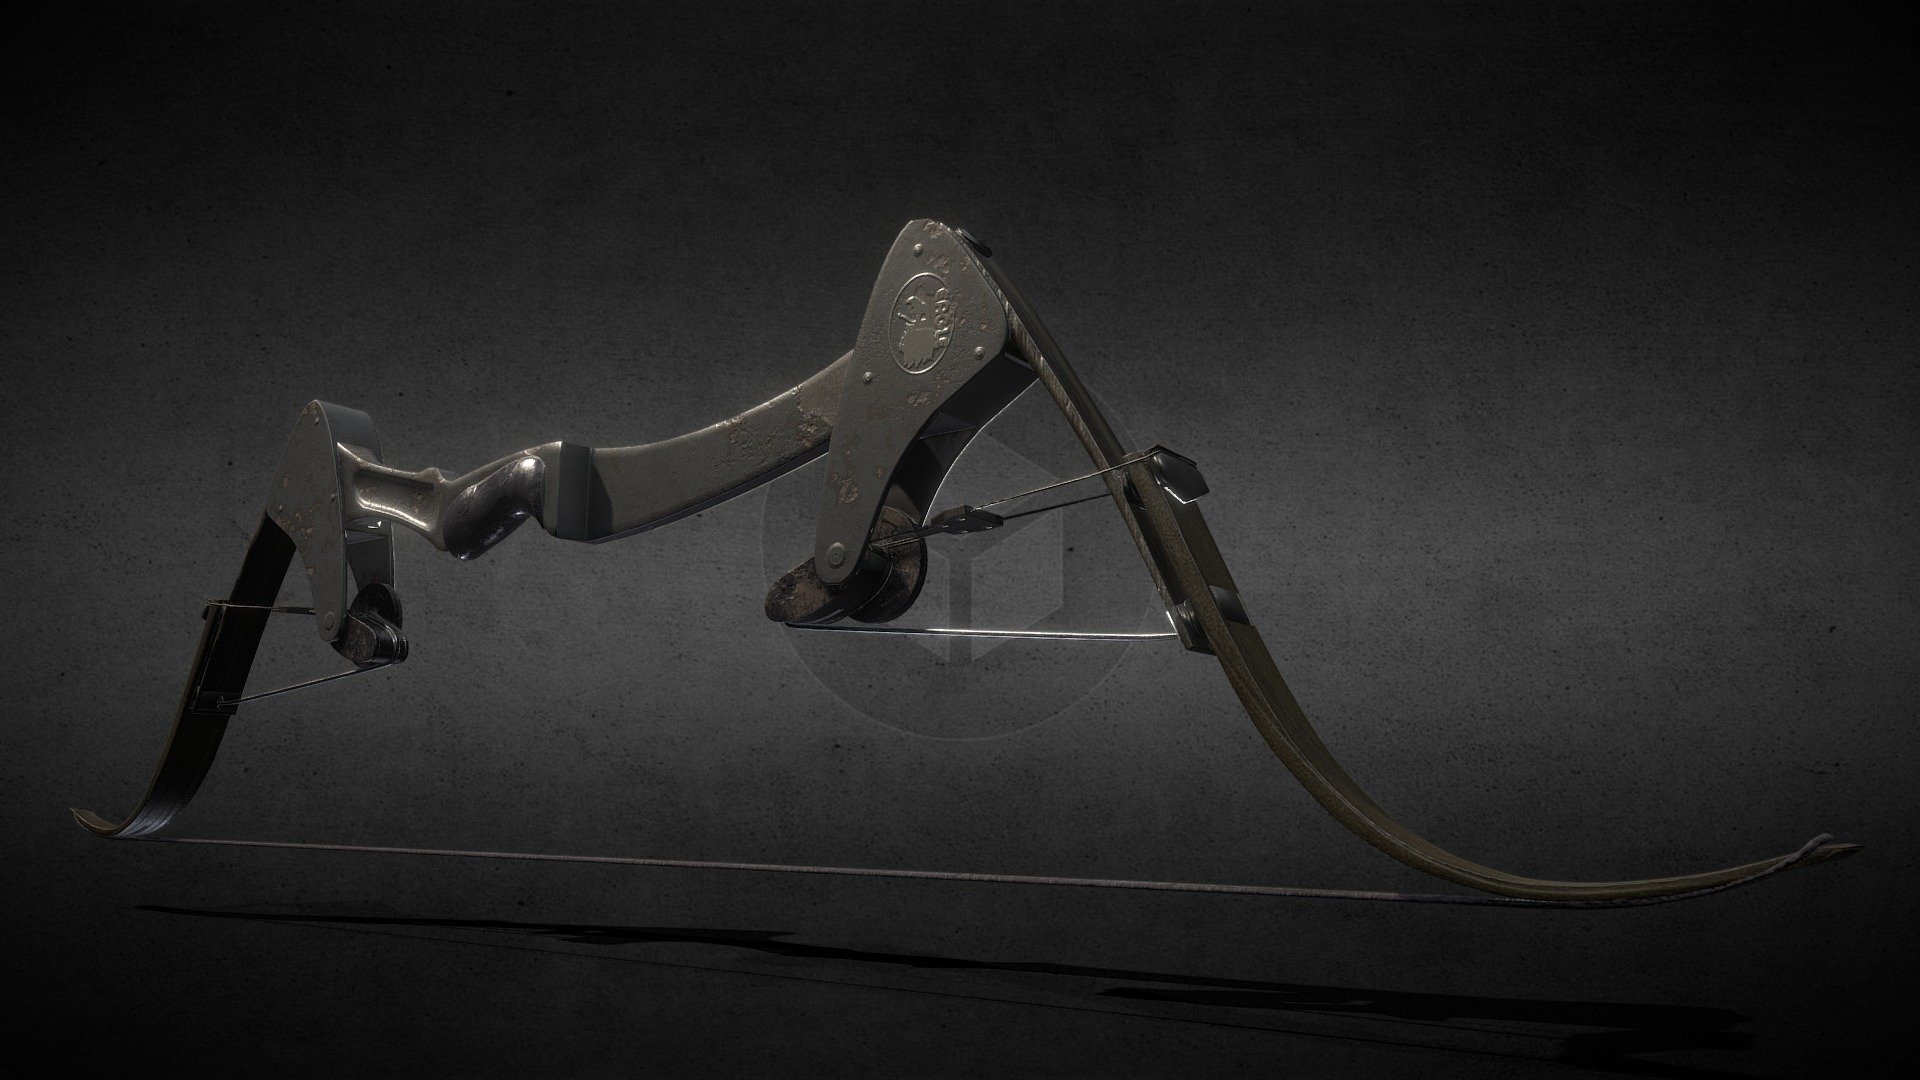 For my final month, I decided to model my favorite bow in my collection. Vintage, but highly attractive.

High resolution model for the first week.

Game resolution mesh for second week.

Textures applied. Wear added. Decals and details pending for final turn in.

Final Render with color corrections, updated UV layouts and resolution tweaks 3d model